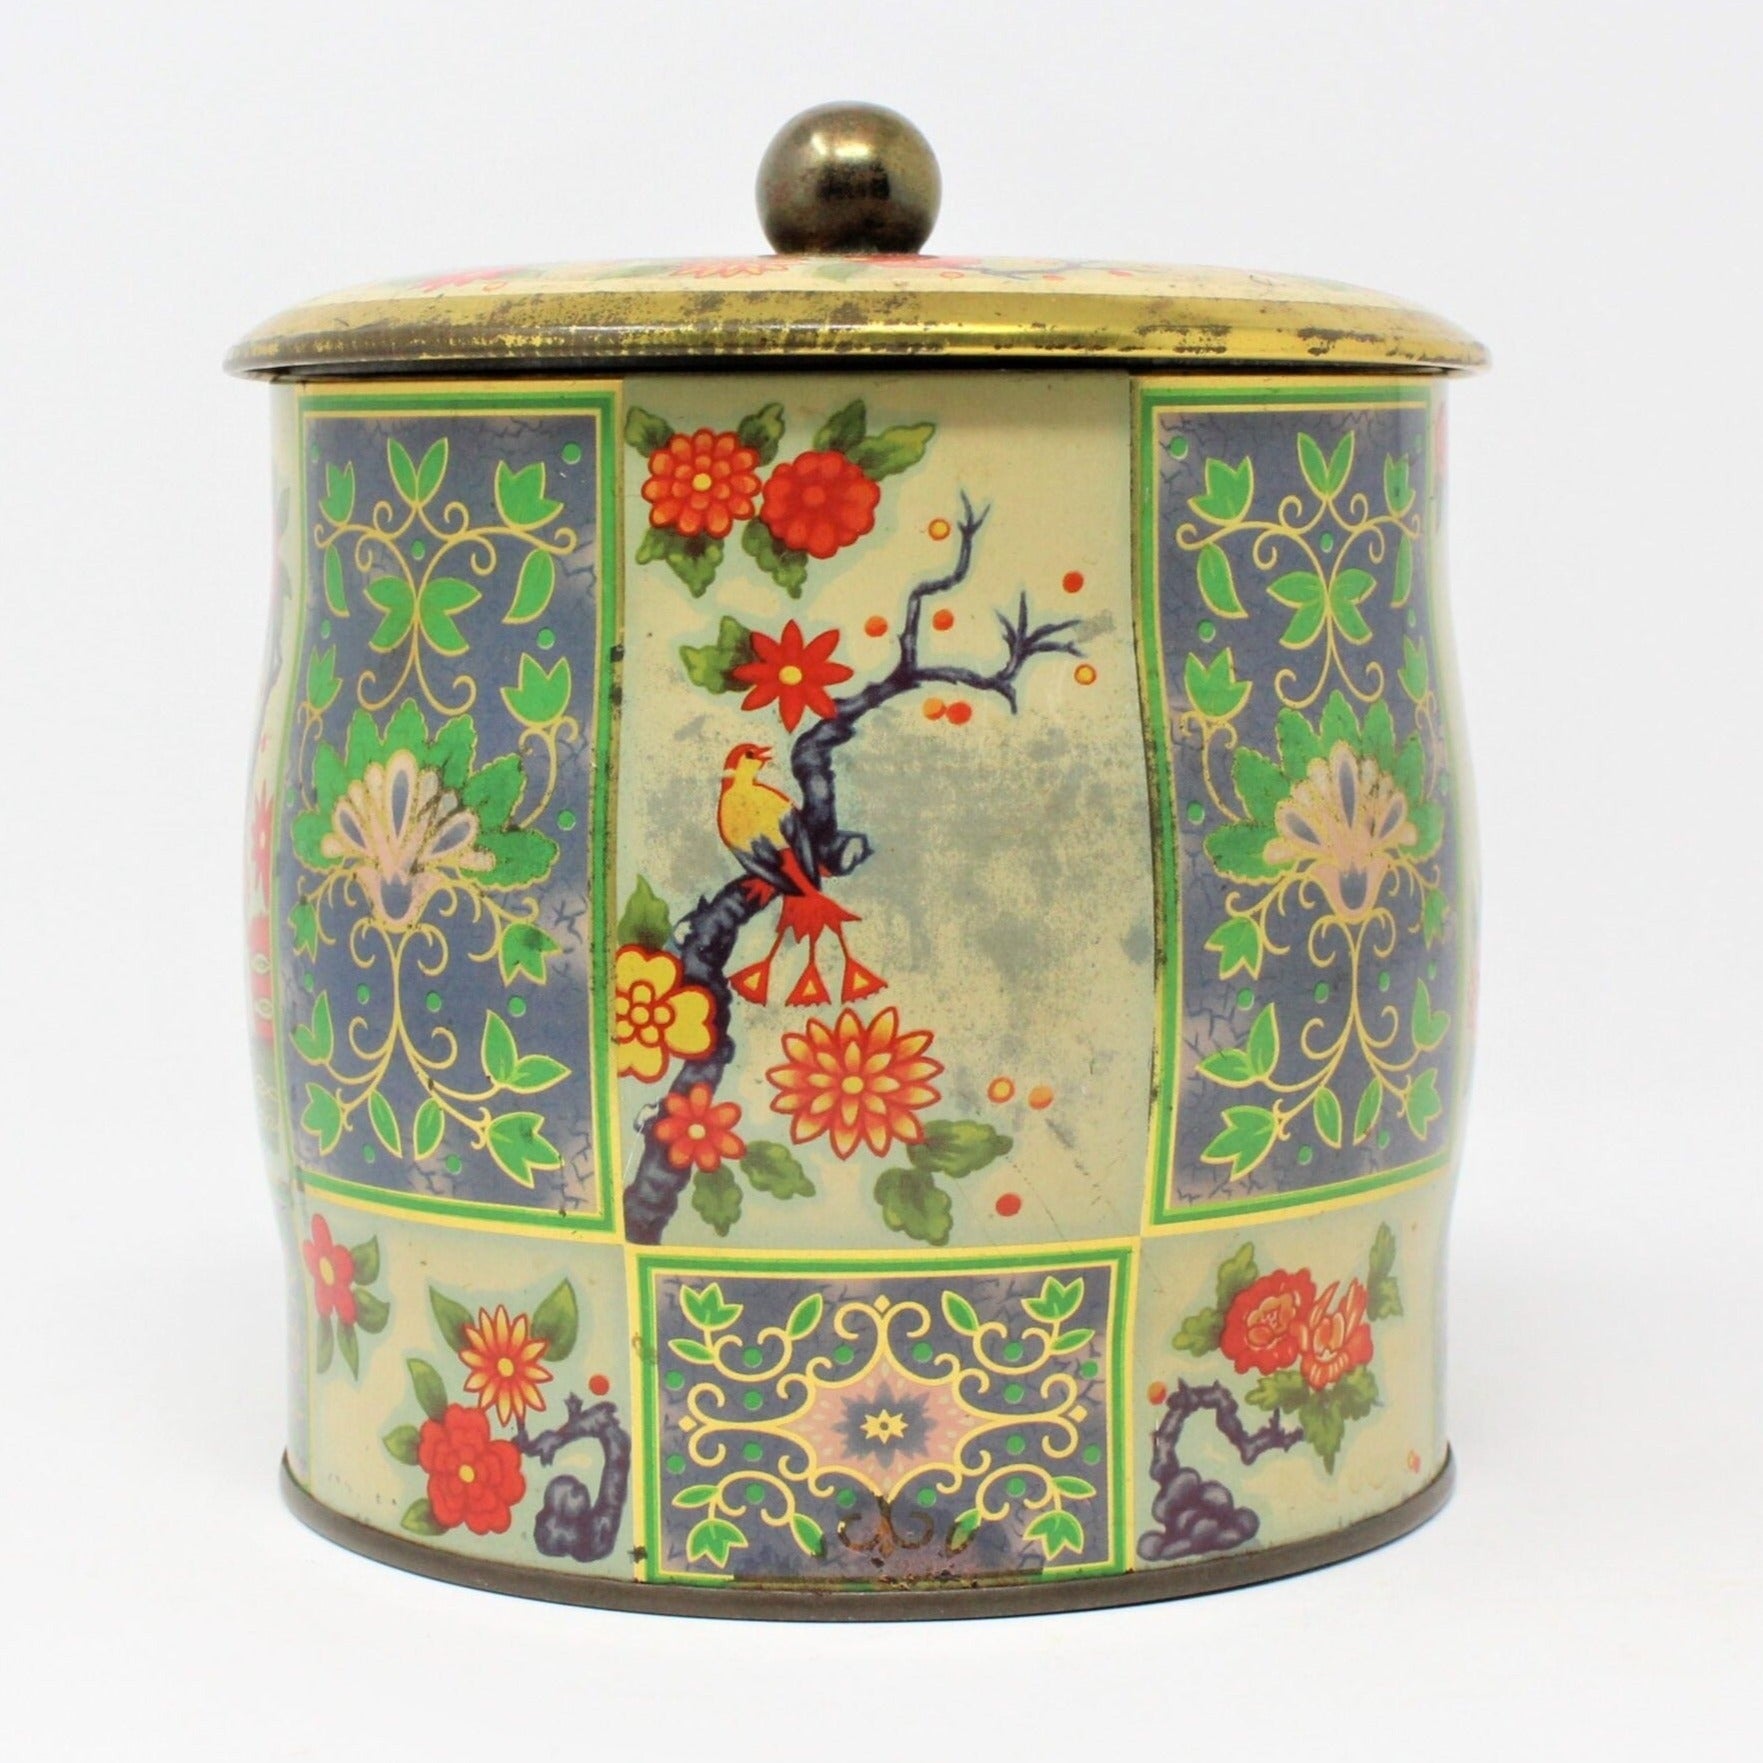 Vintage BAKERY TIN BOX ROUND EMBOSSED THE KRAZY COOKIE CO. MULTI COLOR